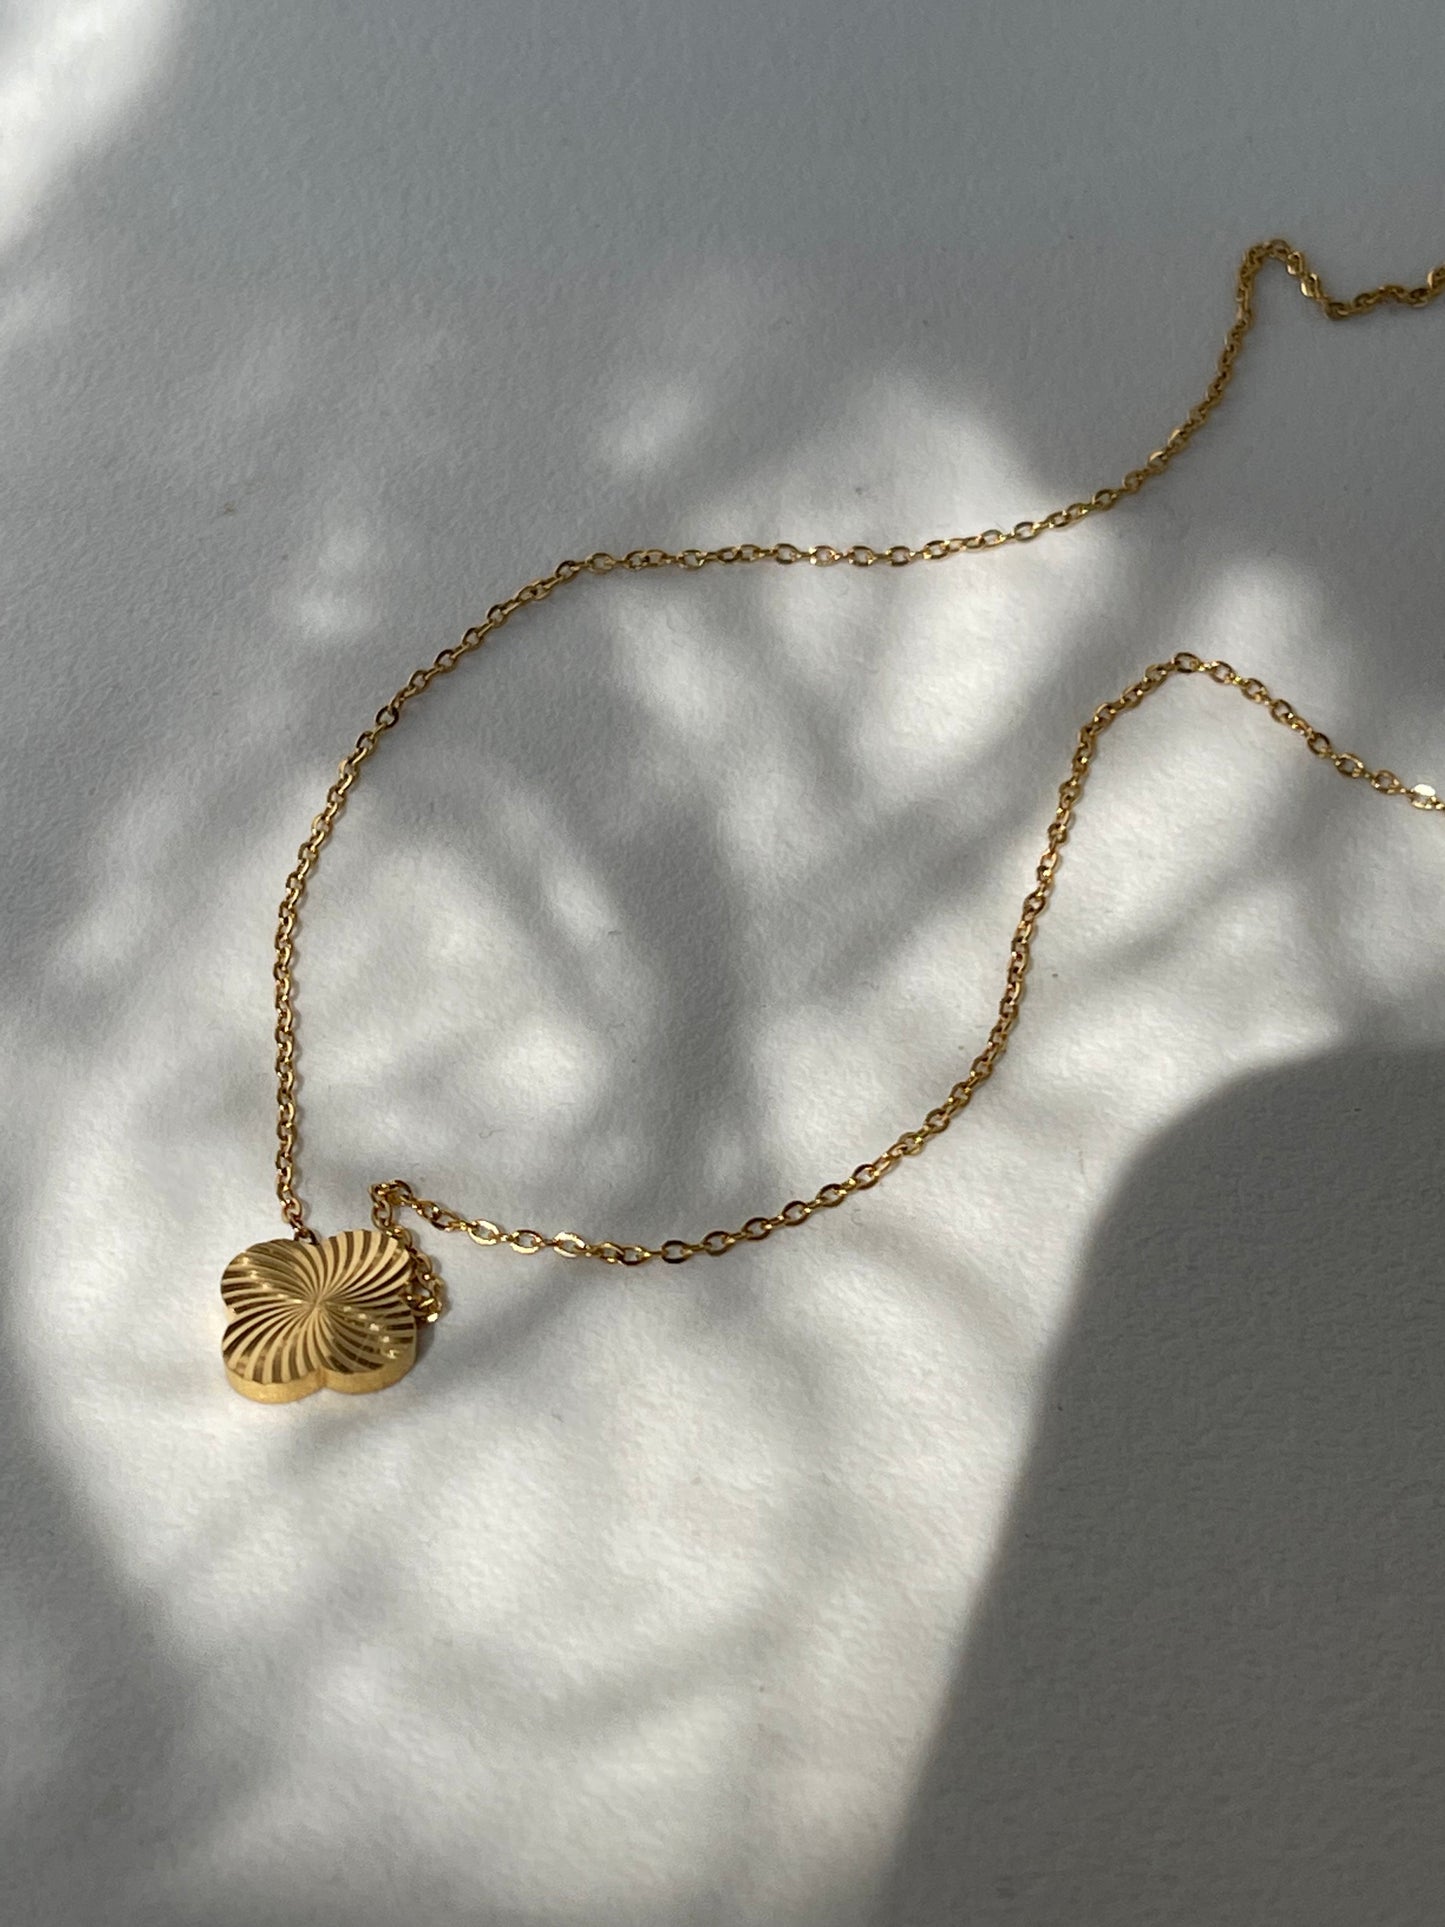 Dixon Stainless Steel Clover Spiral Necklace In Gold